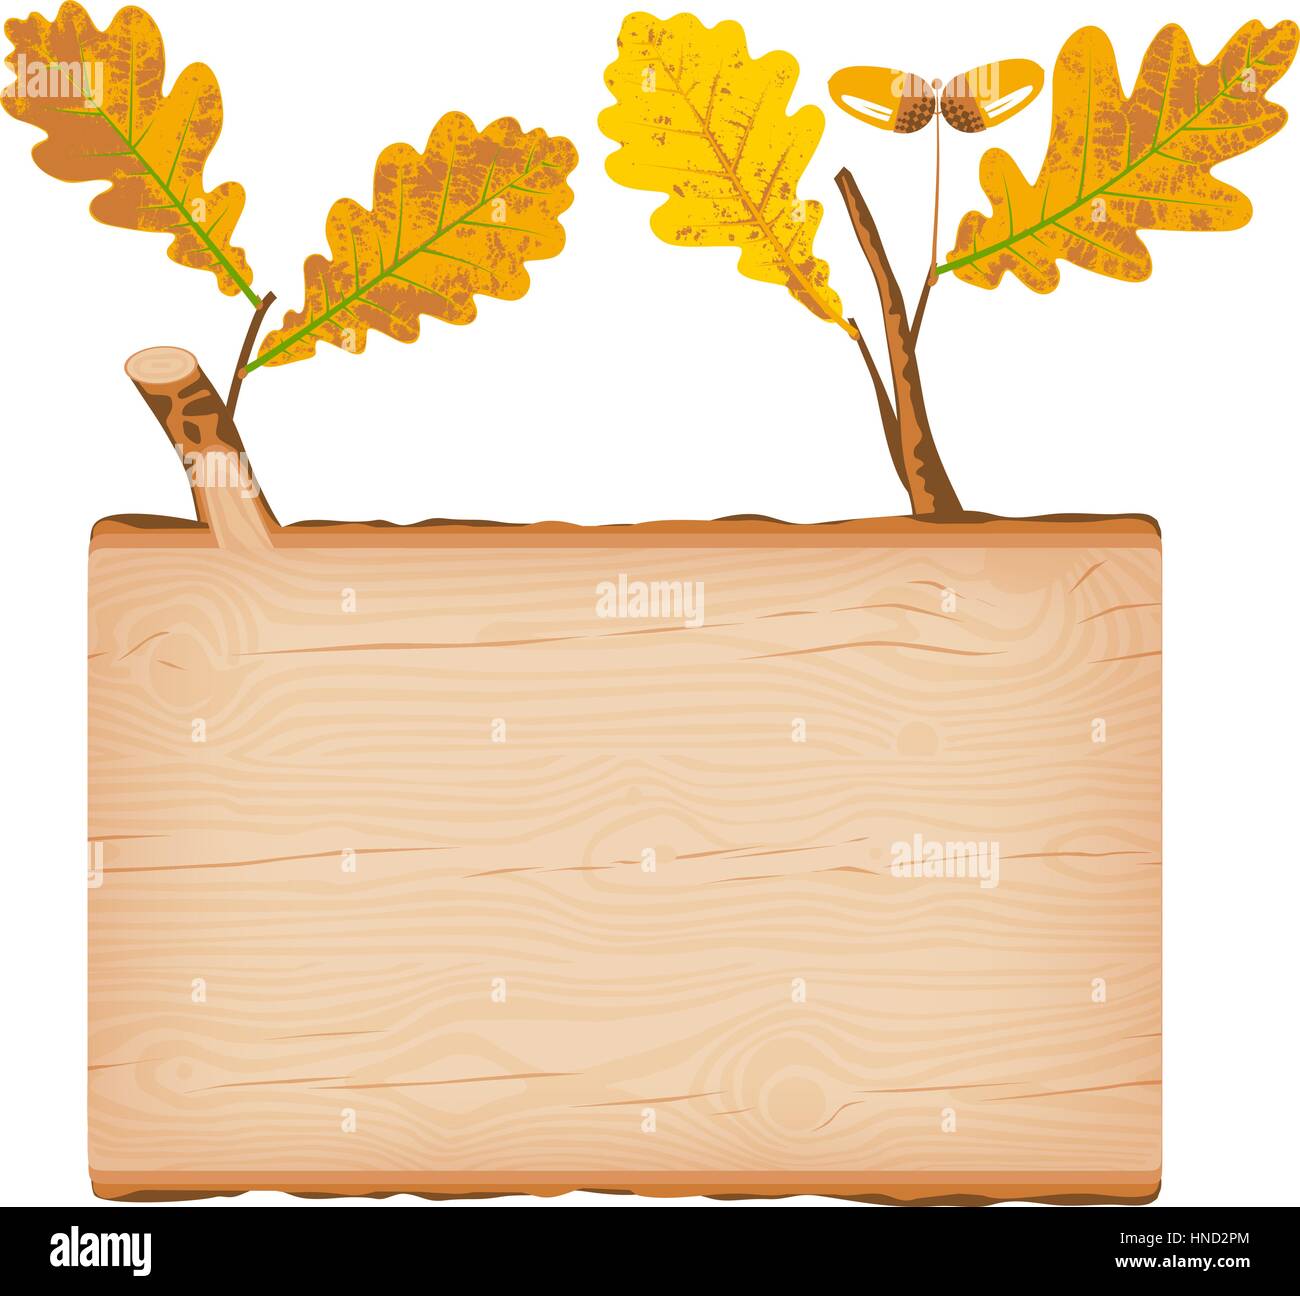 Natural textured oak wooden rectangular signboard with yellow autumn leaves vector illustration Stock Vector